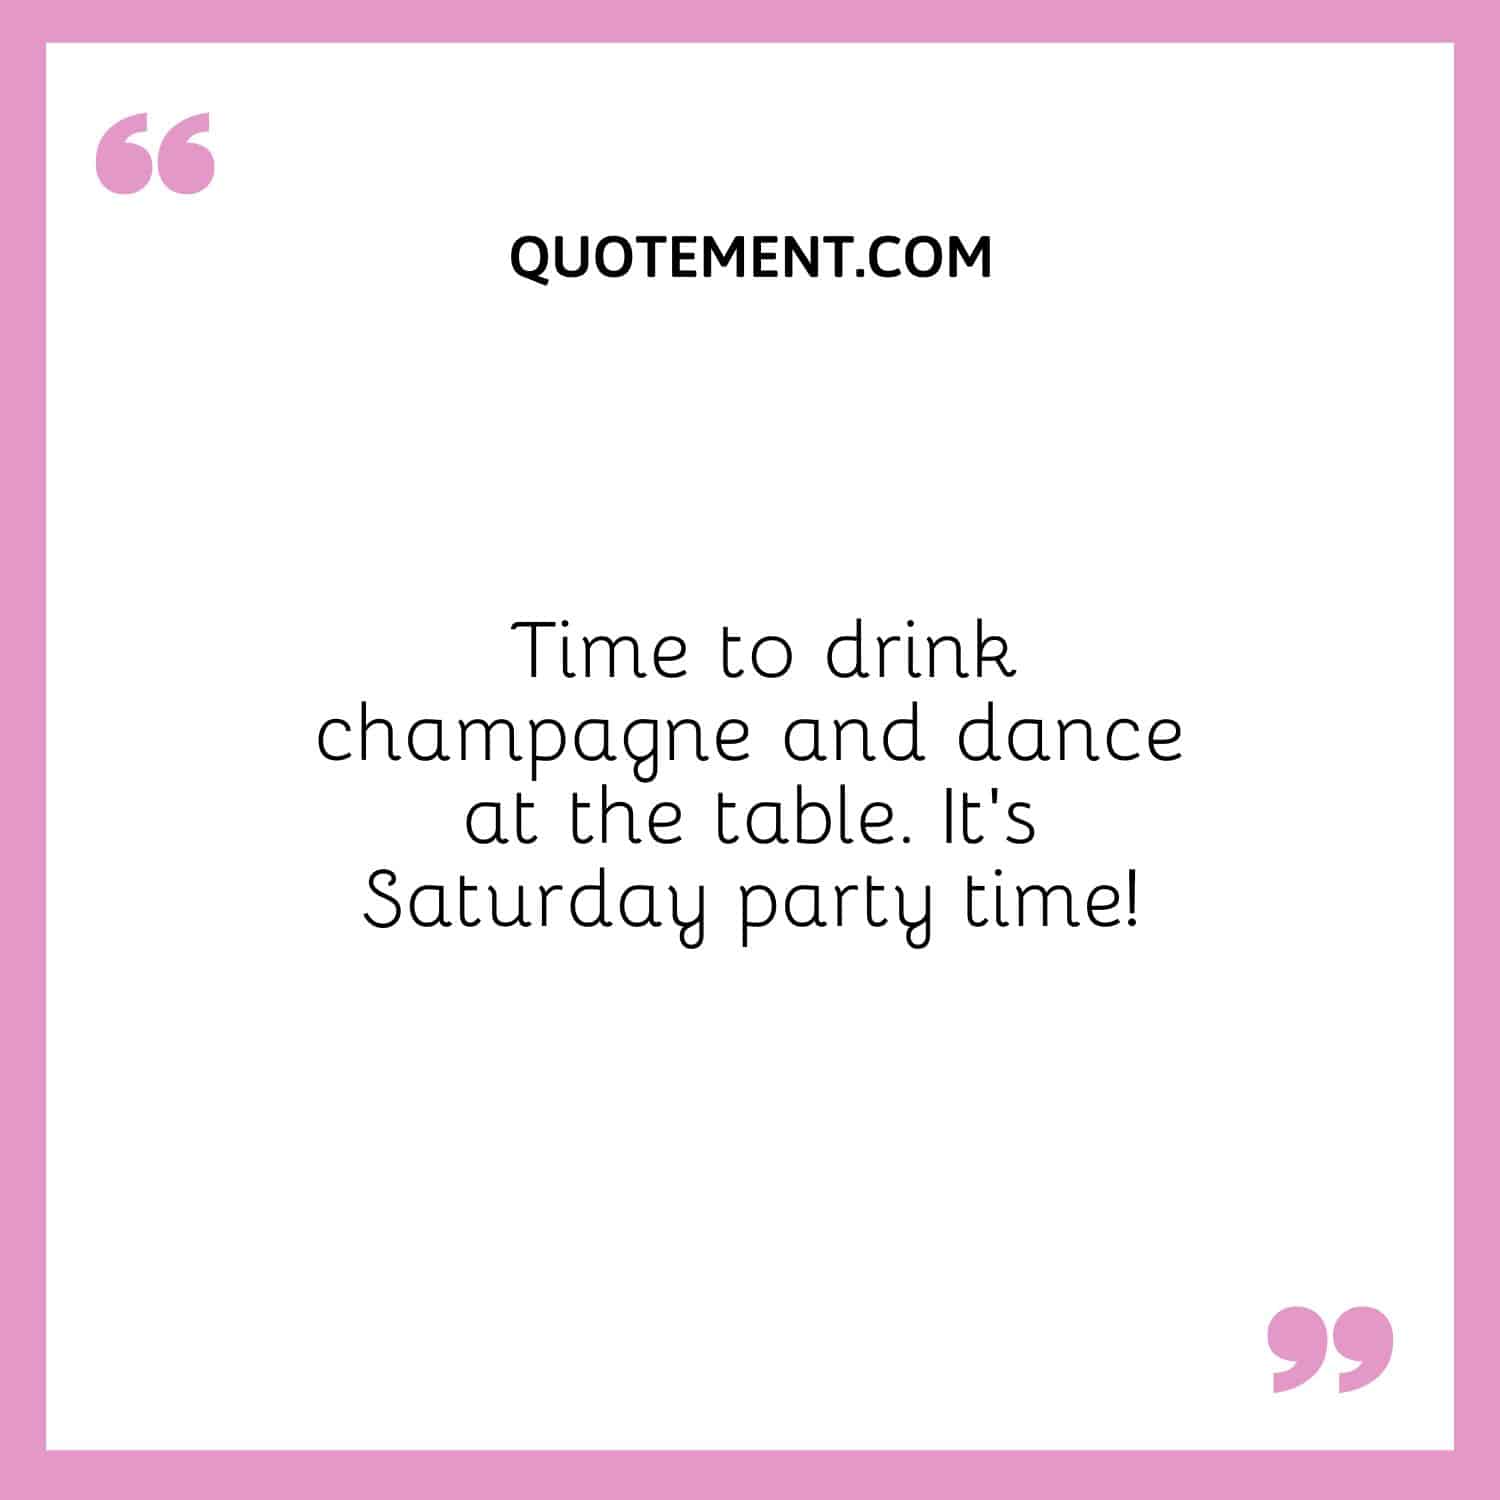 Time to drink champagne and dance at the table